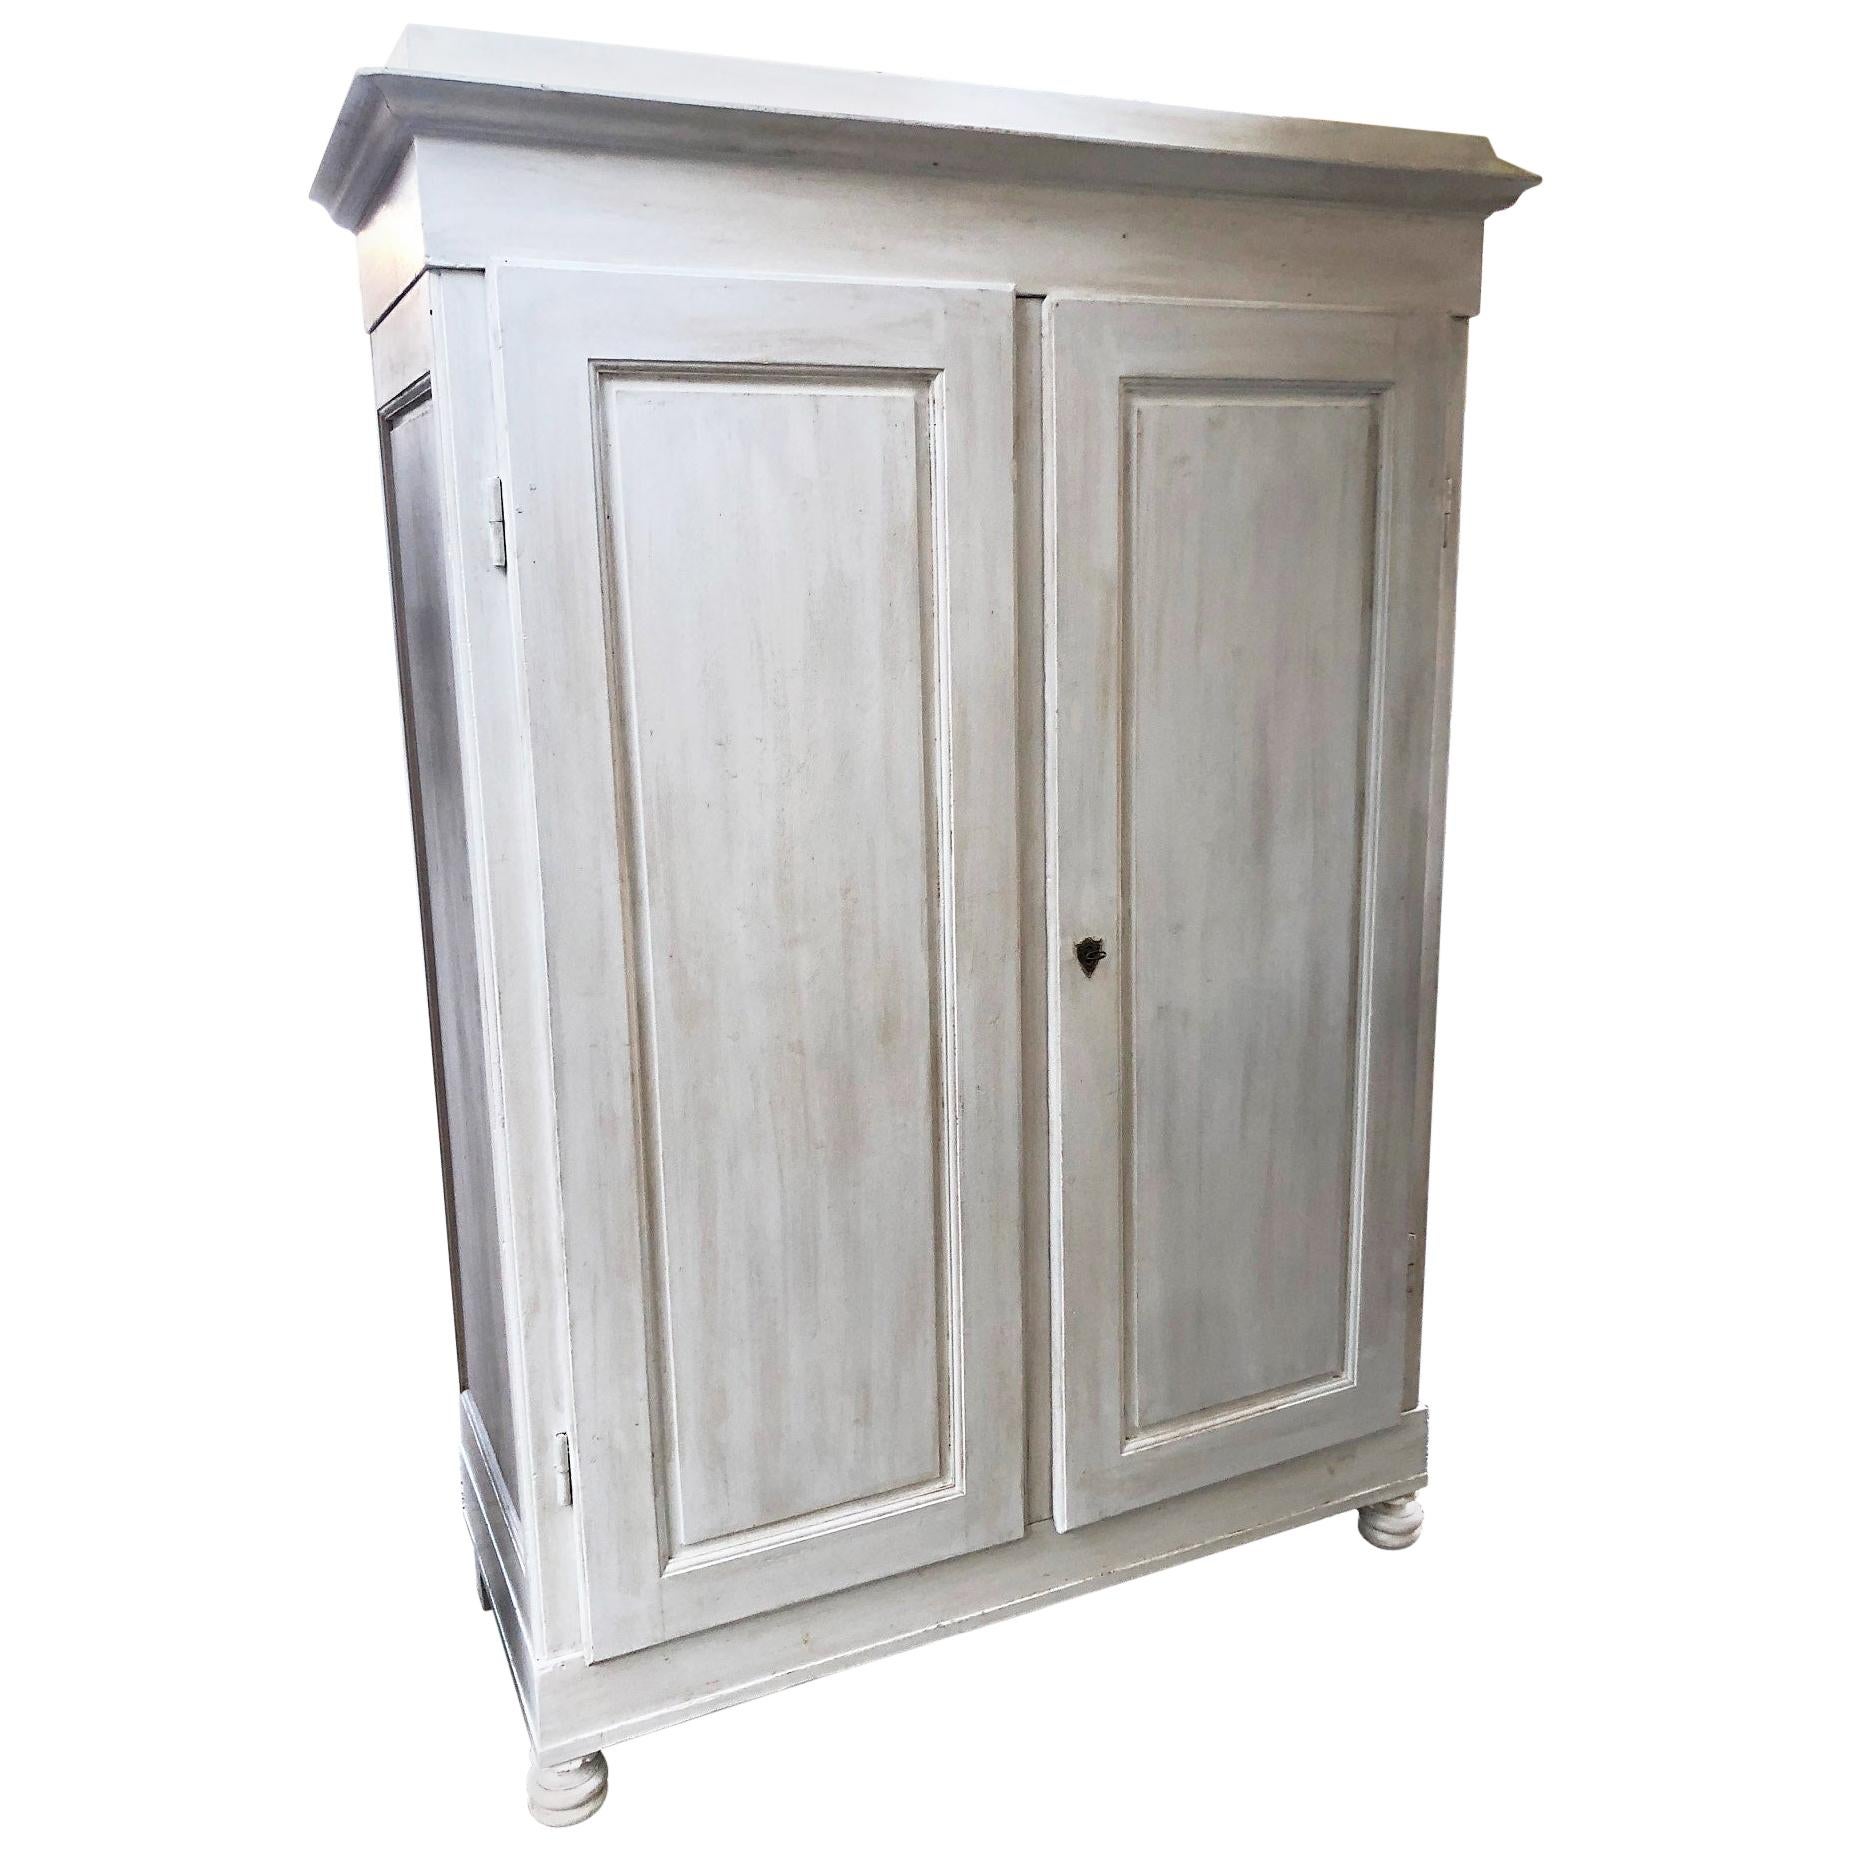  Wardrobe Tuscan Fir with Two Doors Shabby White Color Two Drawers